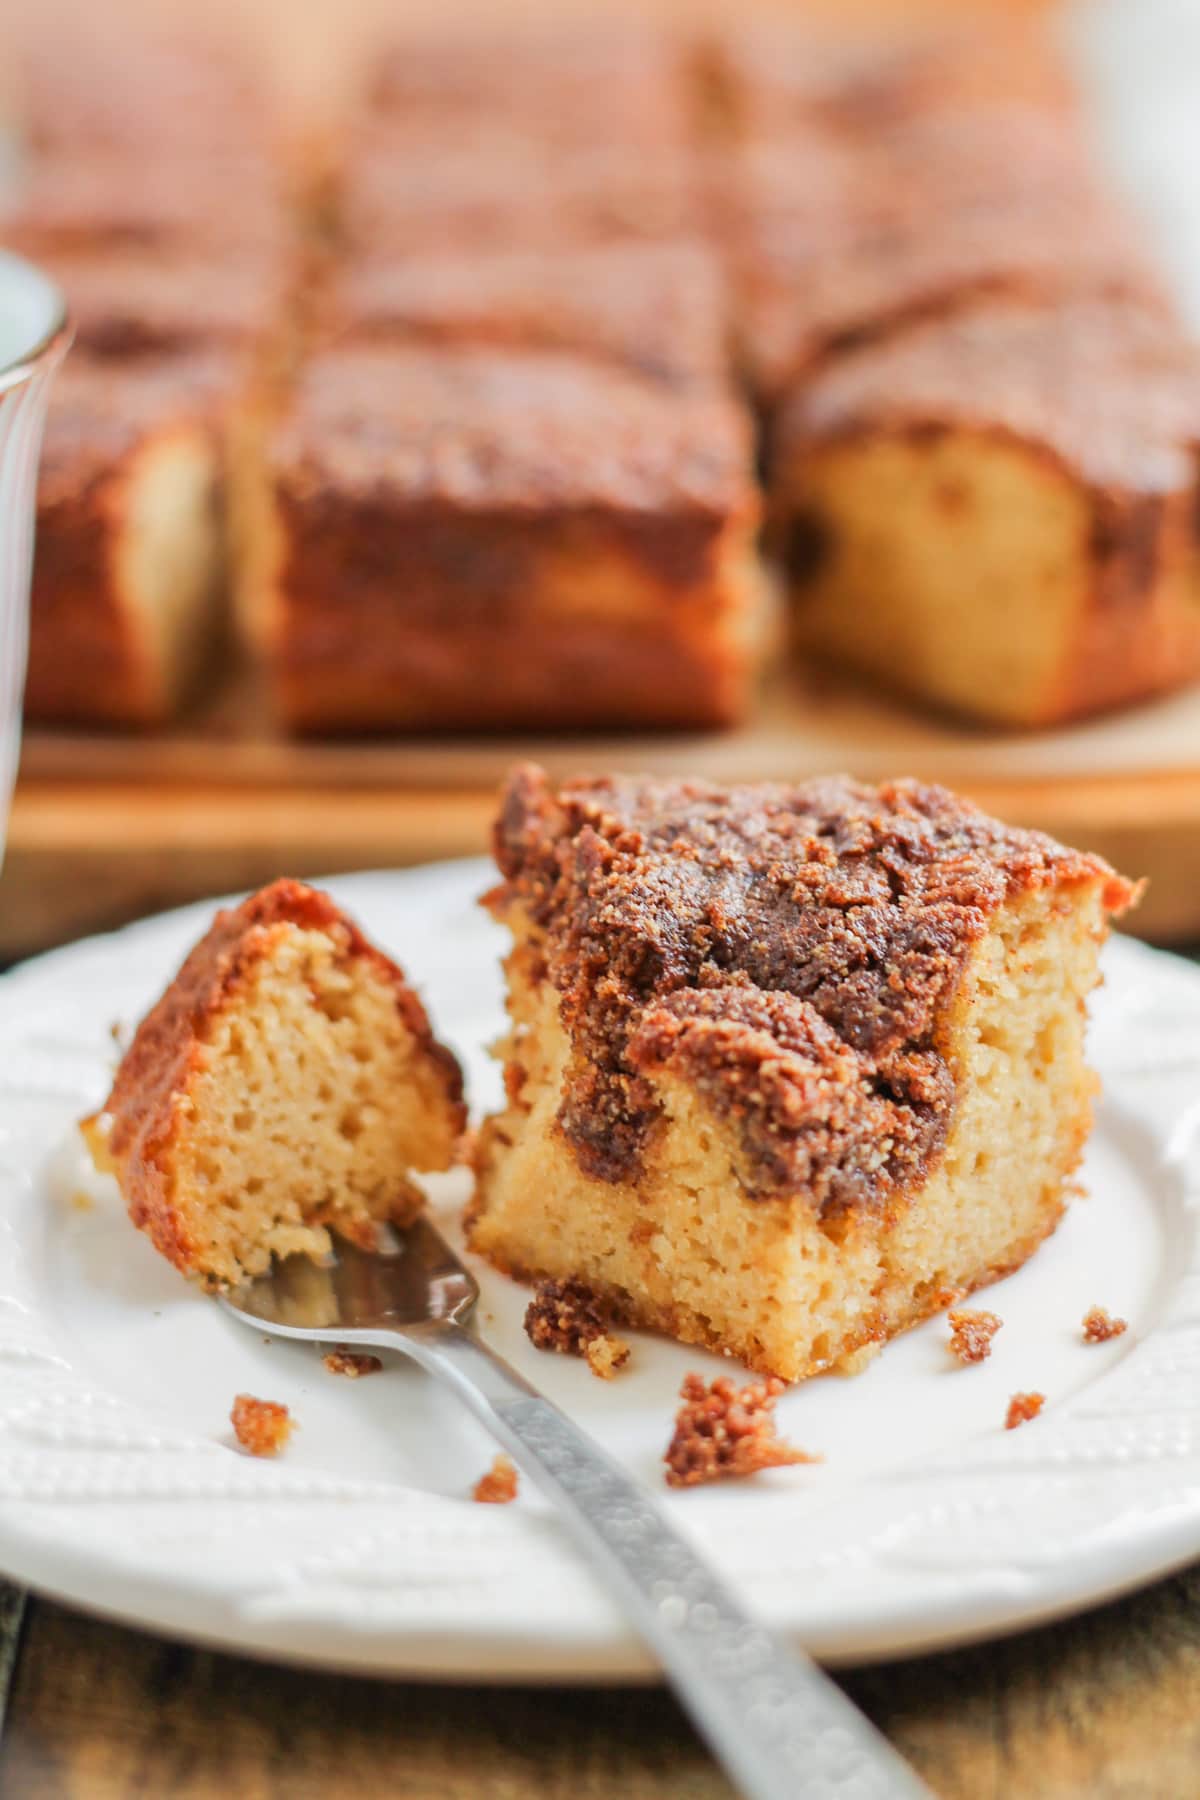 https://thehonoursystem.com/wp-content/uploads/2023/03/healthy-coffee-cake-recipe-11.jpg